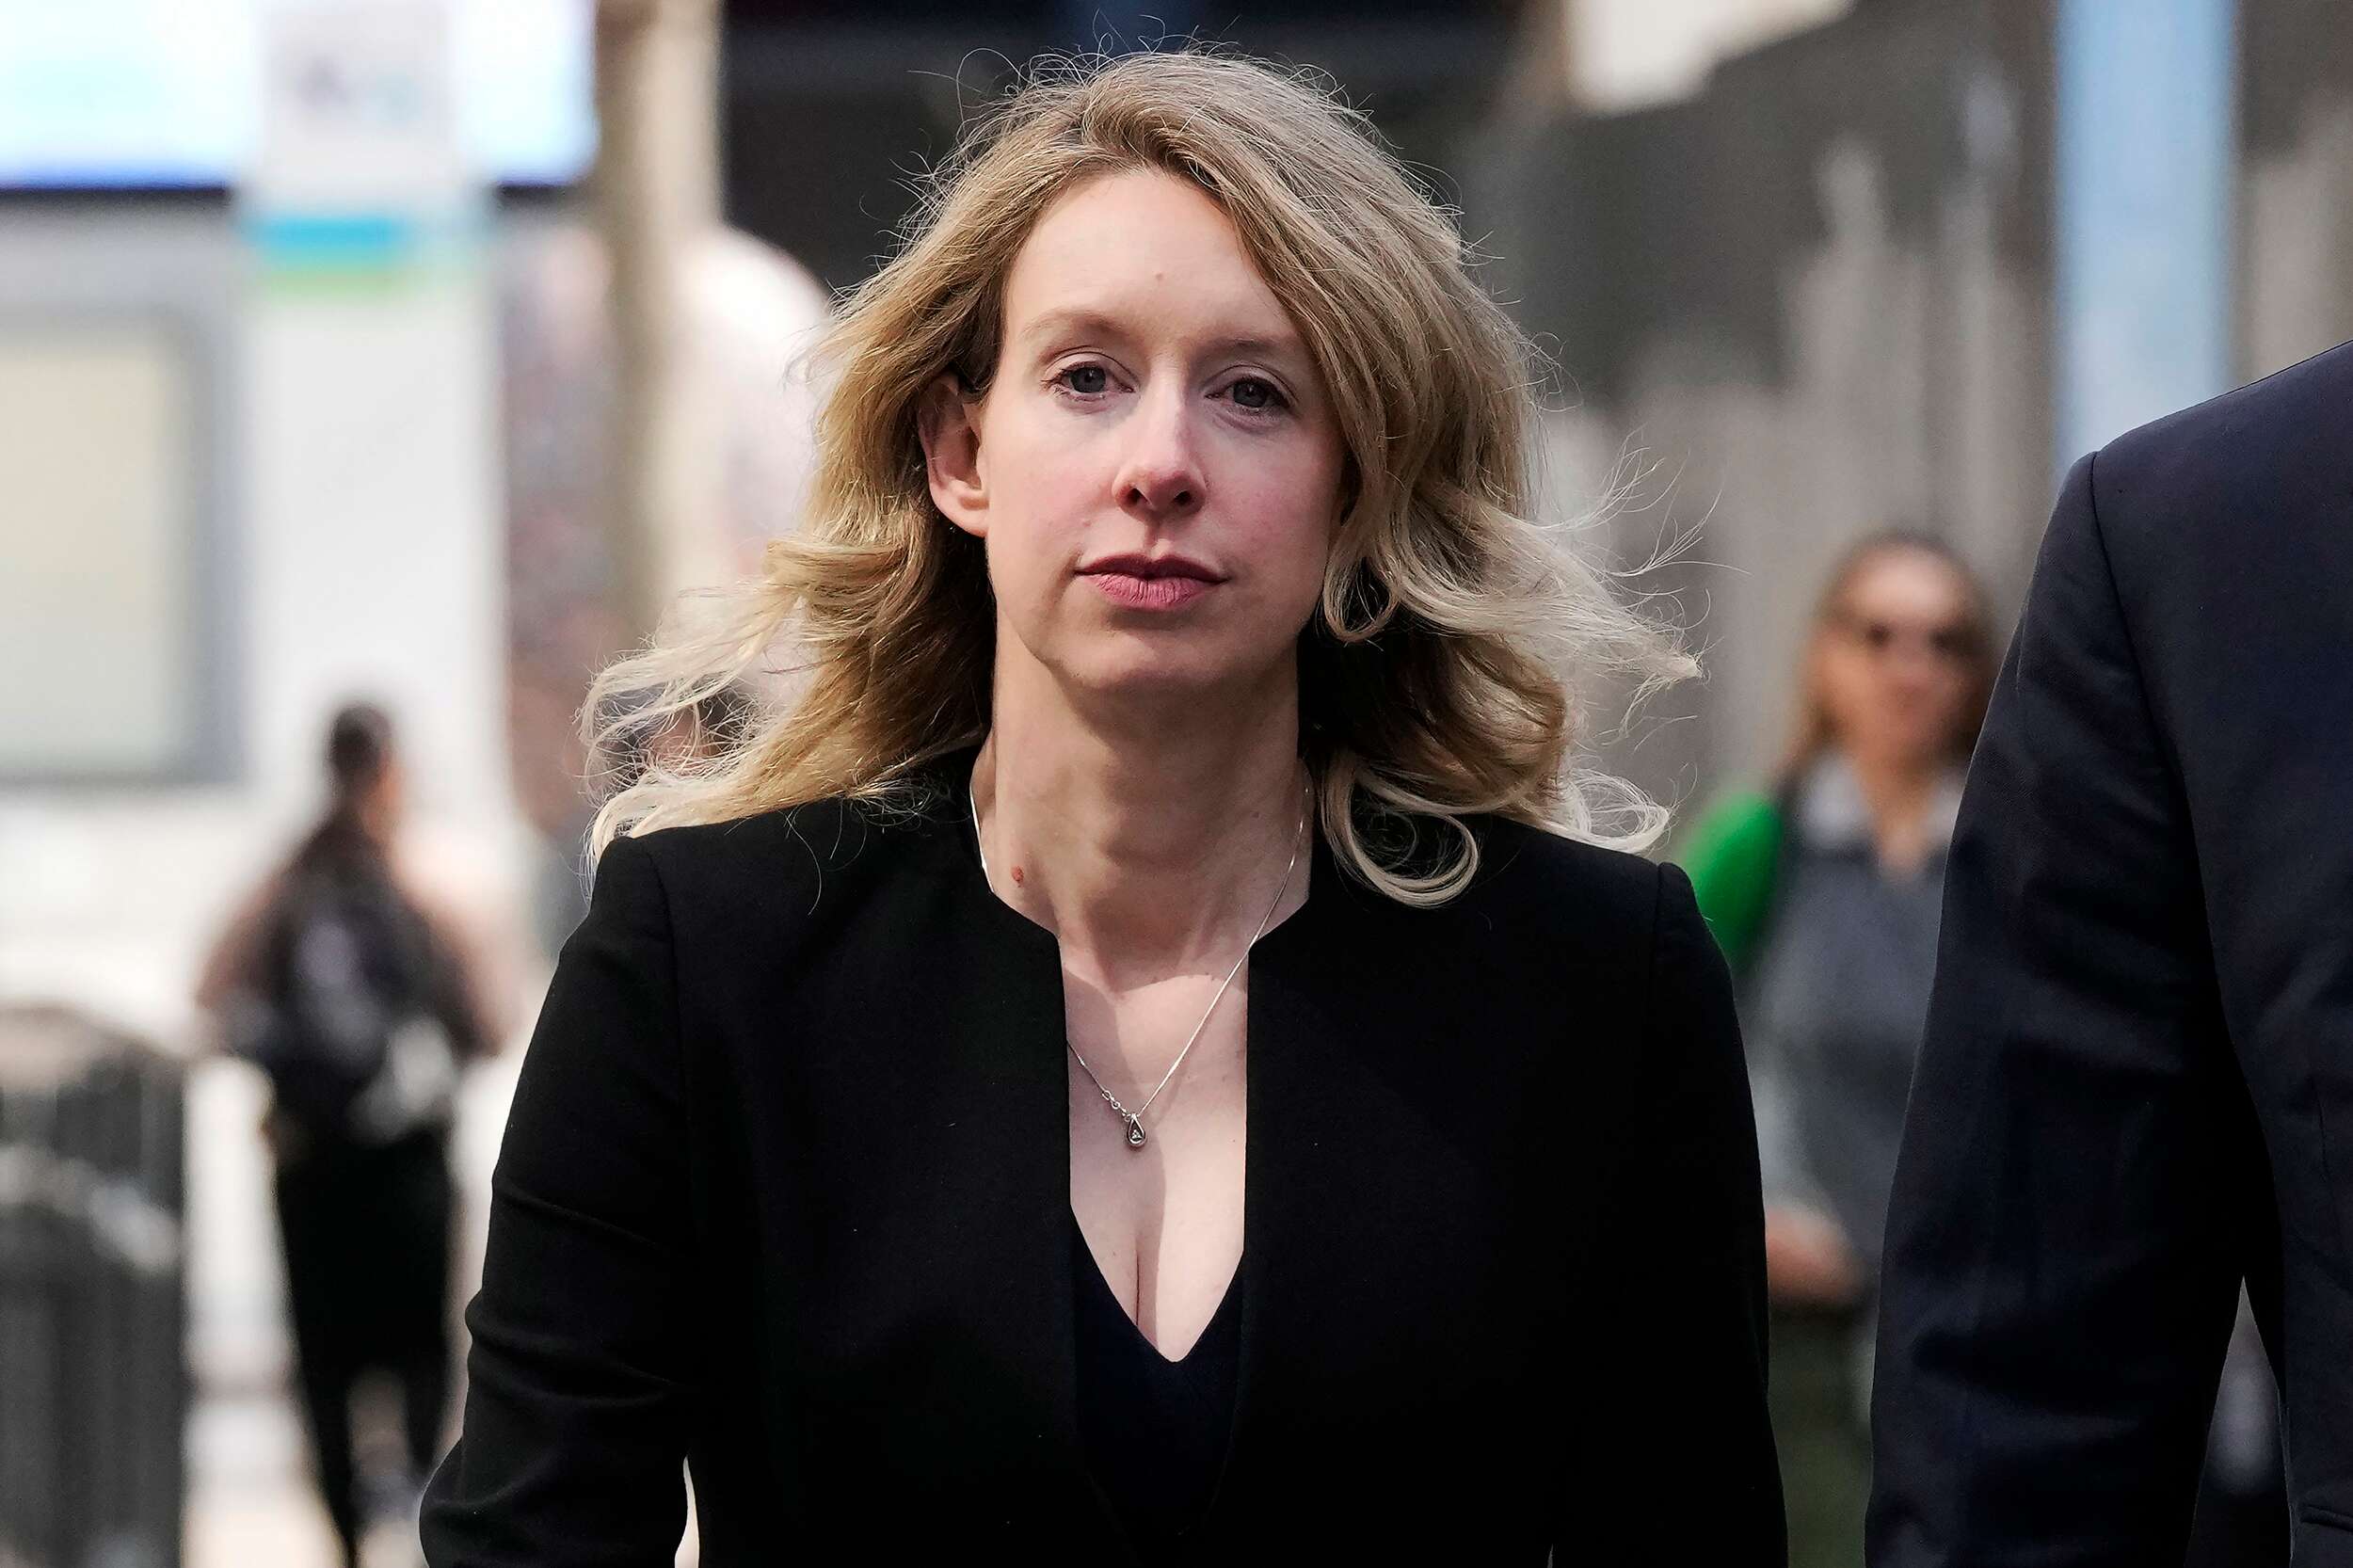 Elizabeth Holmes remains free after lodging appeal to avoid prison